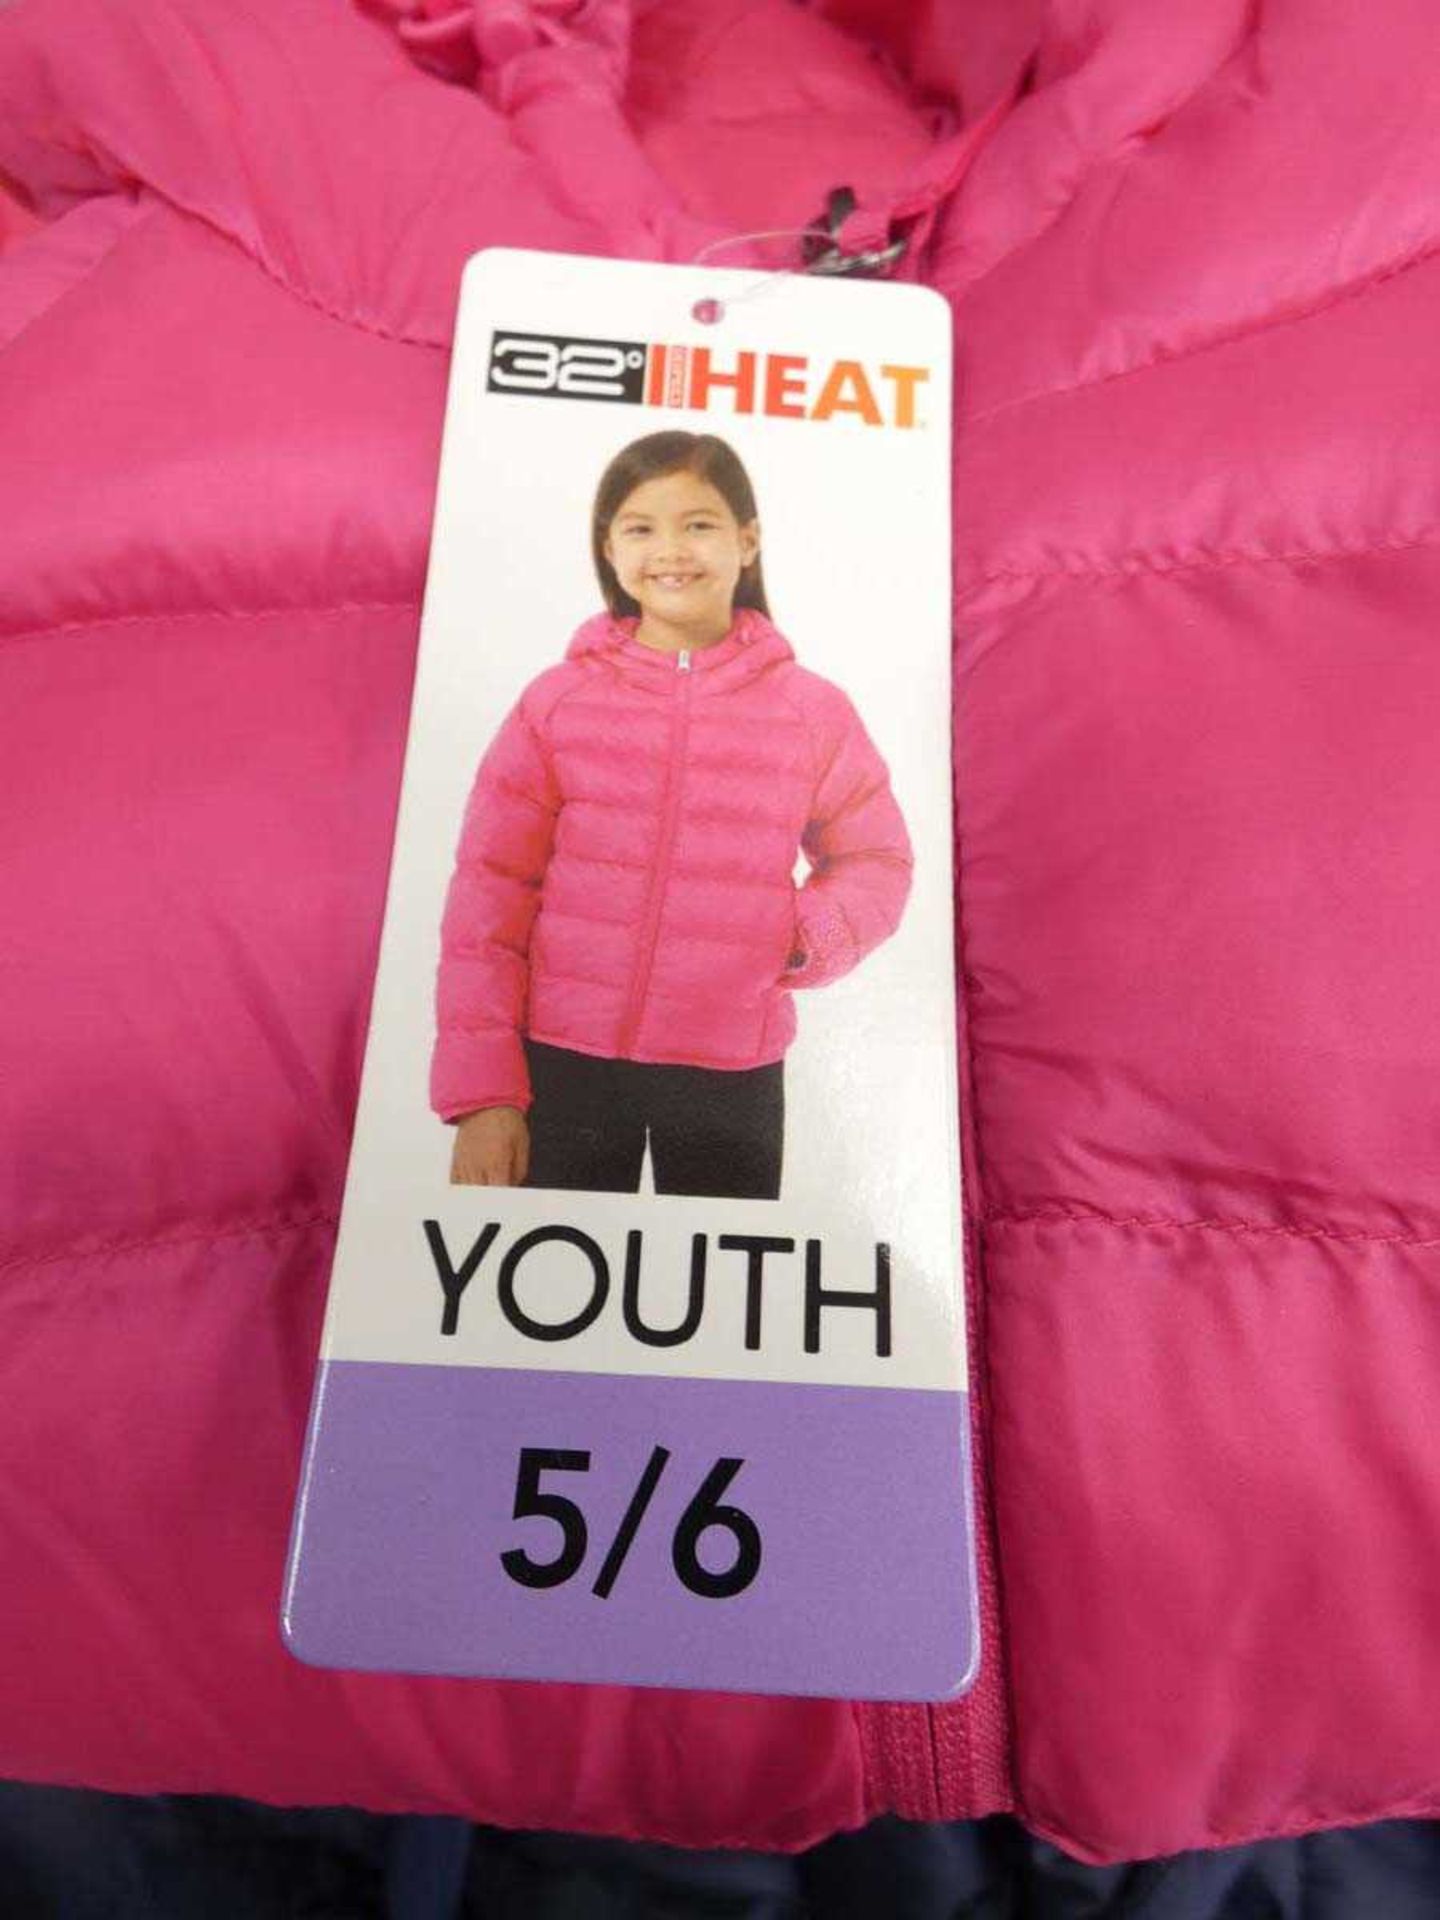 Approx. 15 children's 32 Degree Heat winter jackets, in various colours and sizes - Image 2 of 3